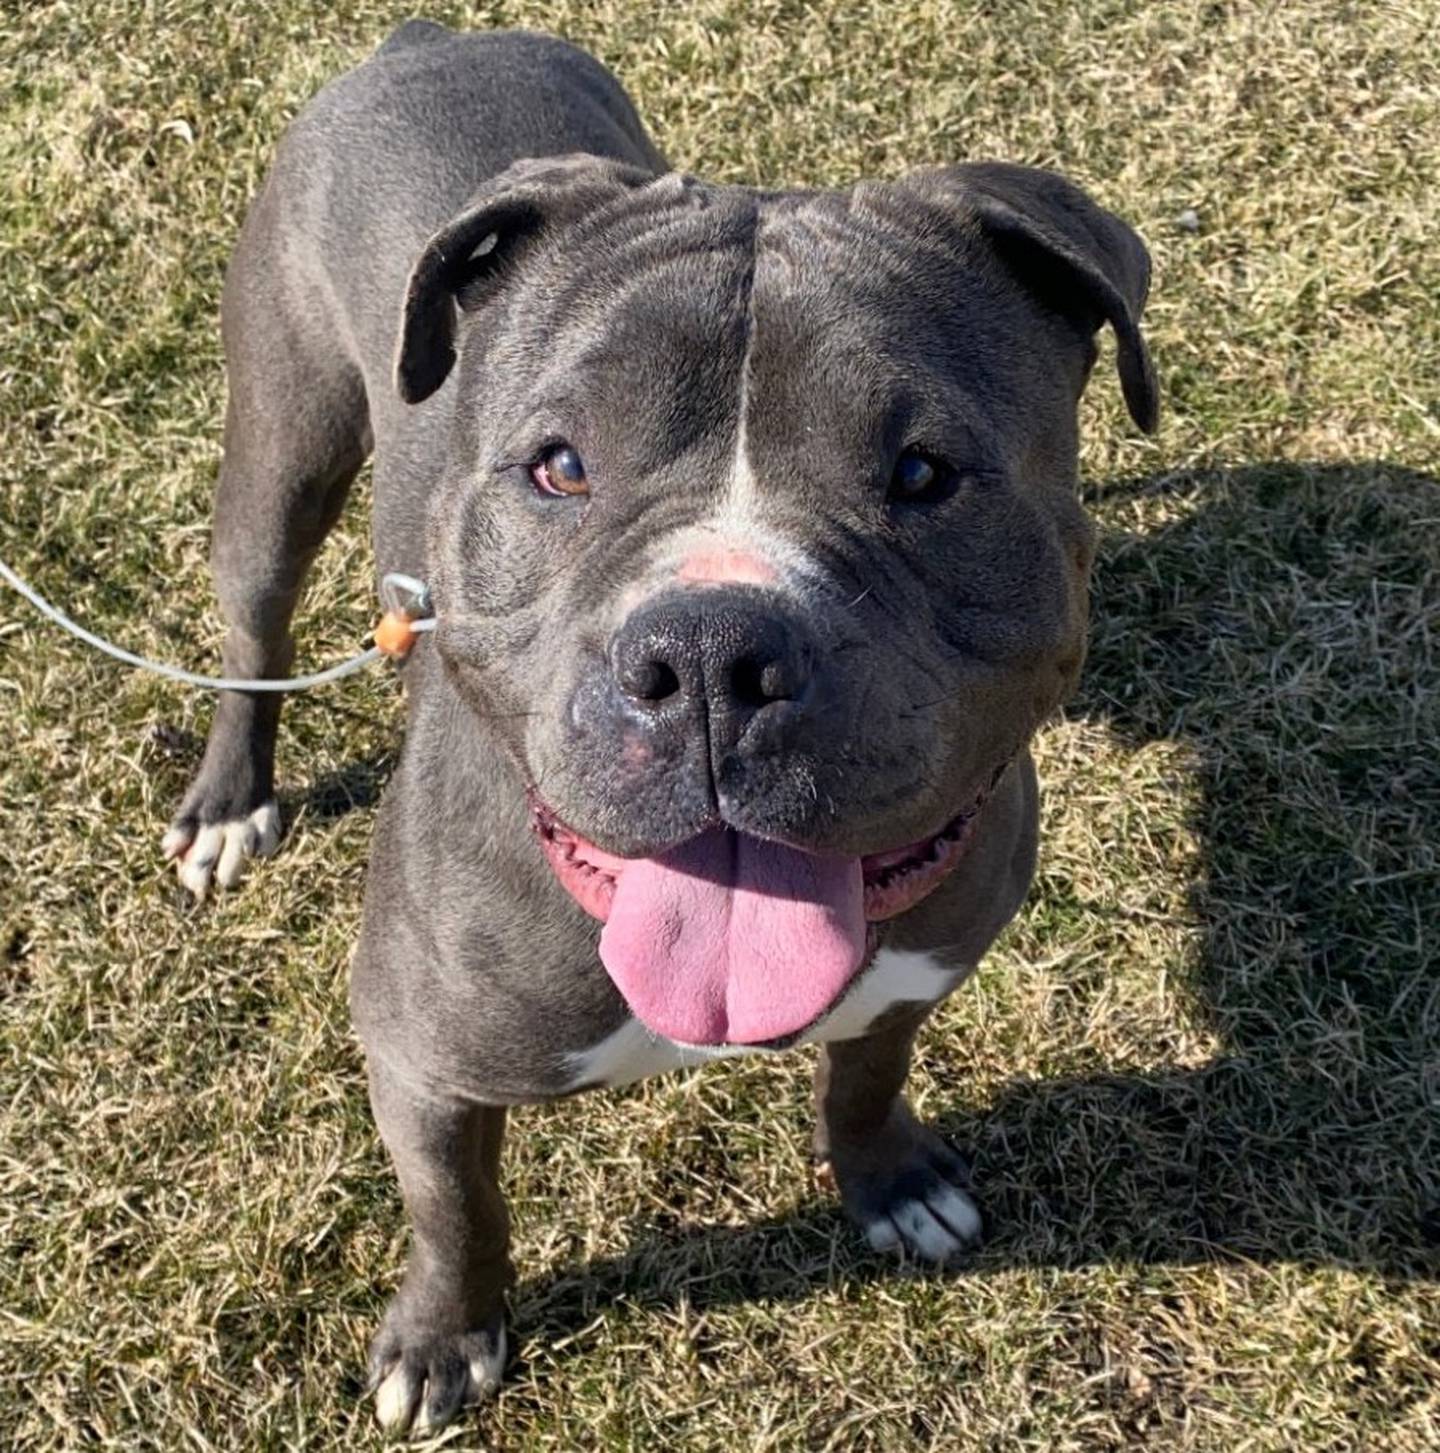 Norbert is a 2-year-old gentle pittie mix. Norbert loves people and toys. He gets so excited to play and will collect all the toys in his mouth, carrying multiple at a time. To meet Norbert, call Joliet Township Animal Control at 815-725-0333.